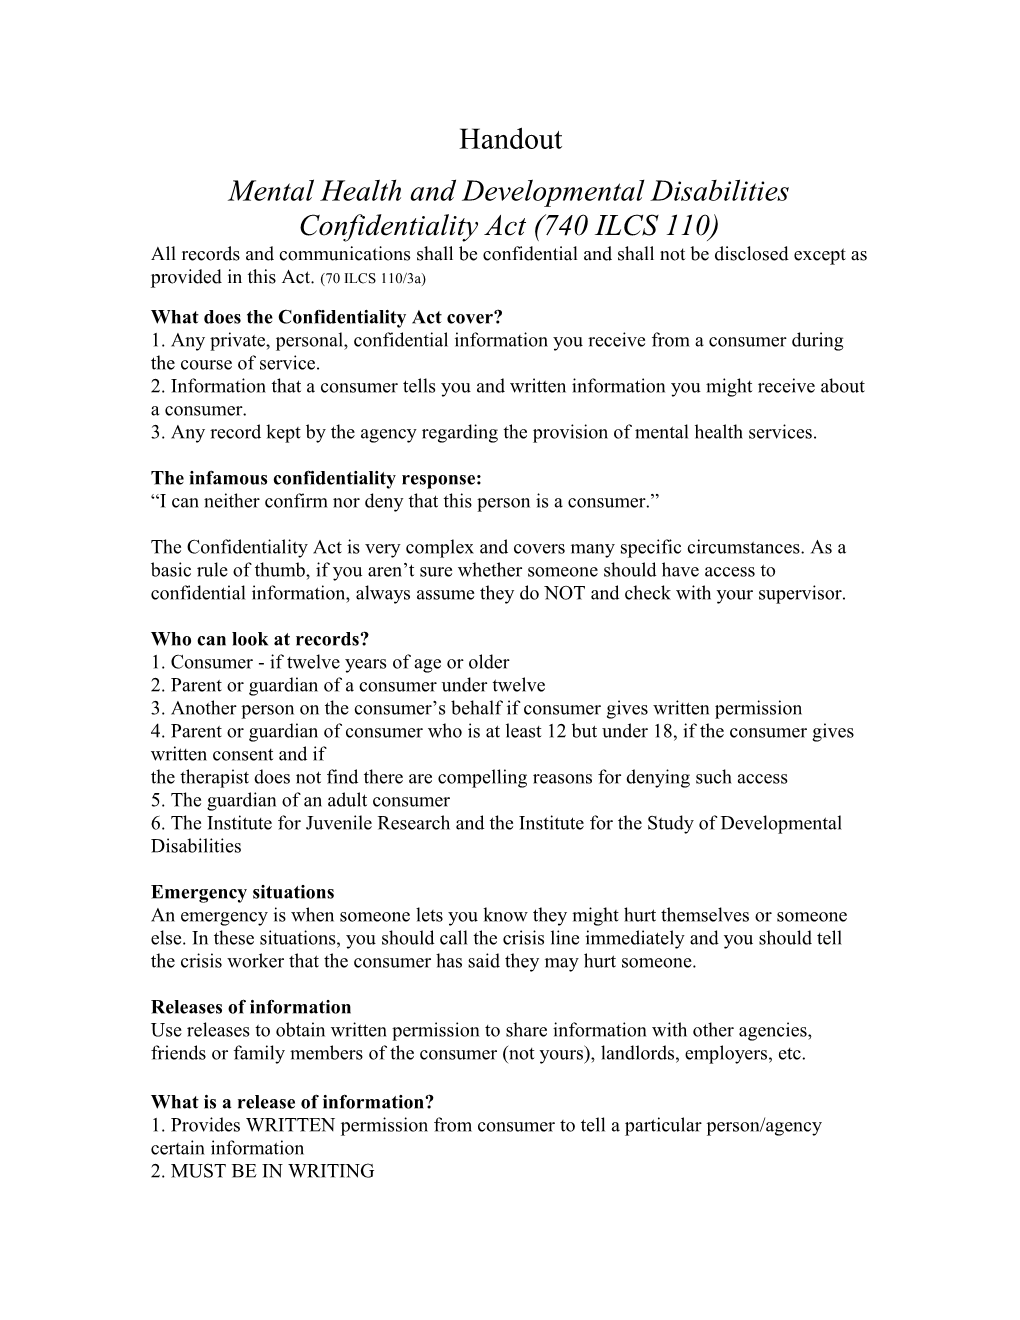 Mental Health and Developmental Disabilities Confidentiality Act (740 ILCS 110)